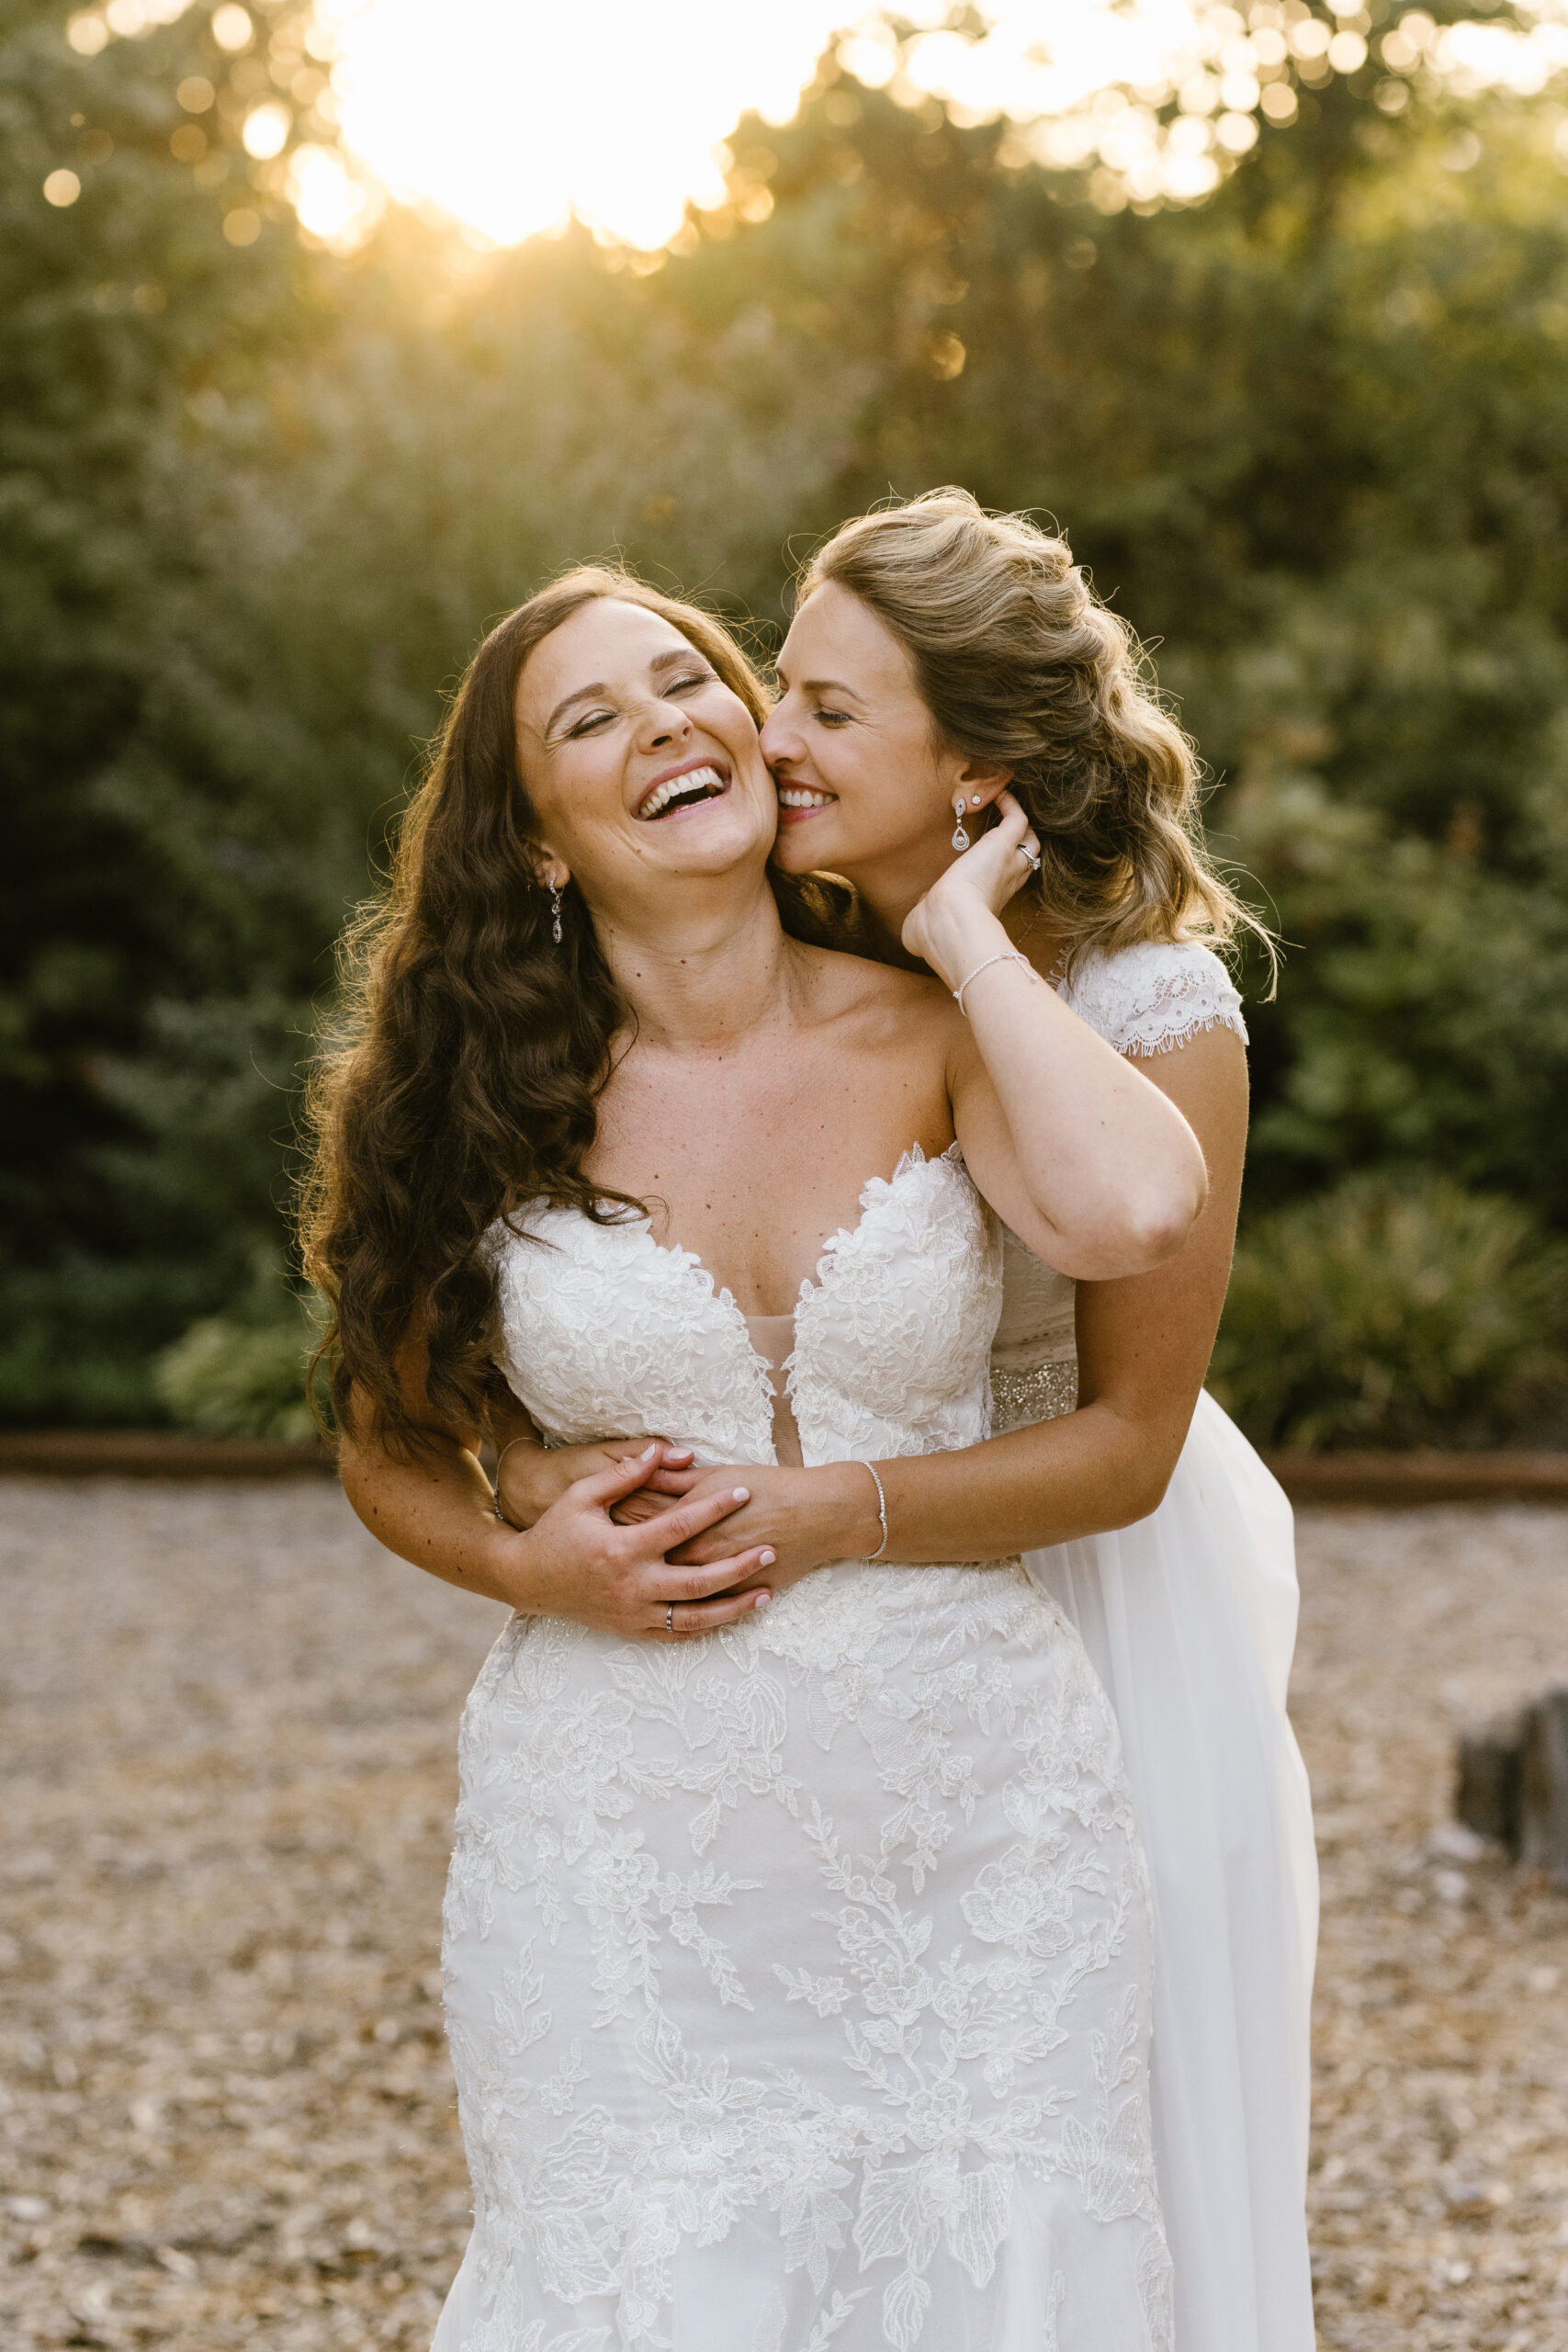 A bride holds a bride from behind while they're both smiling and laughing.